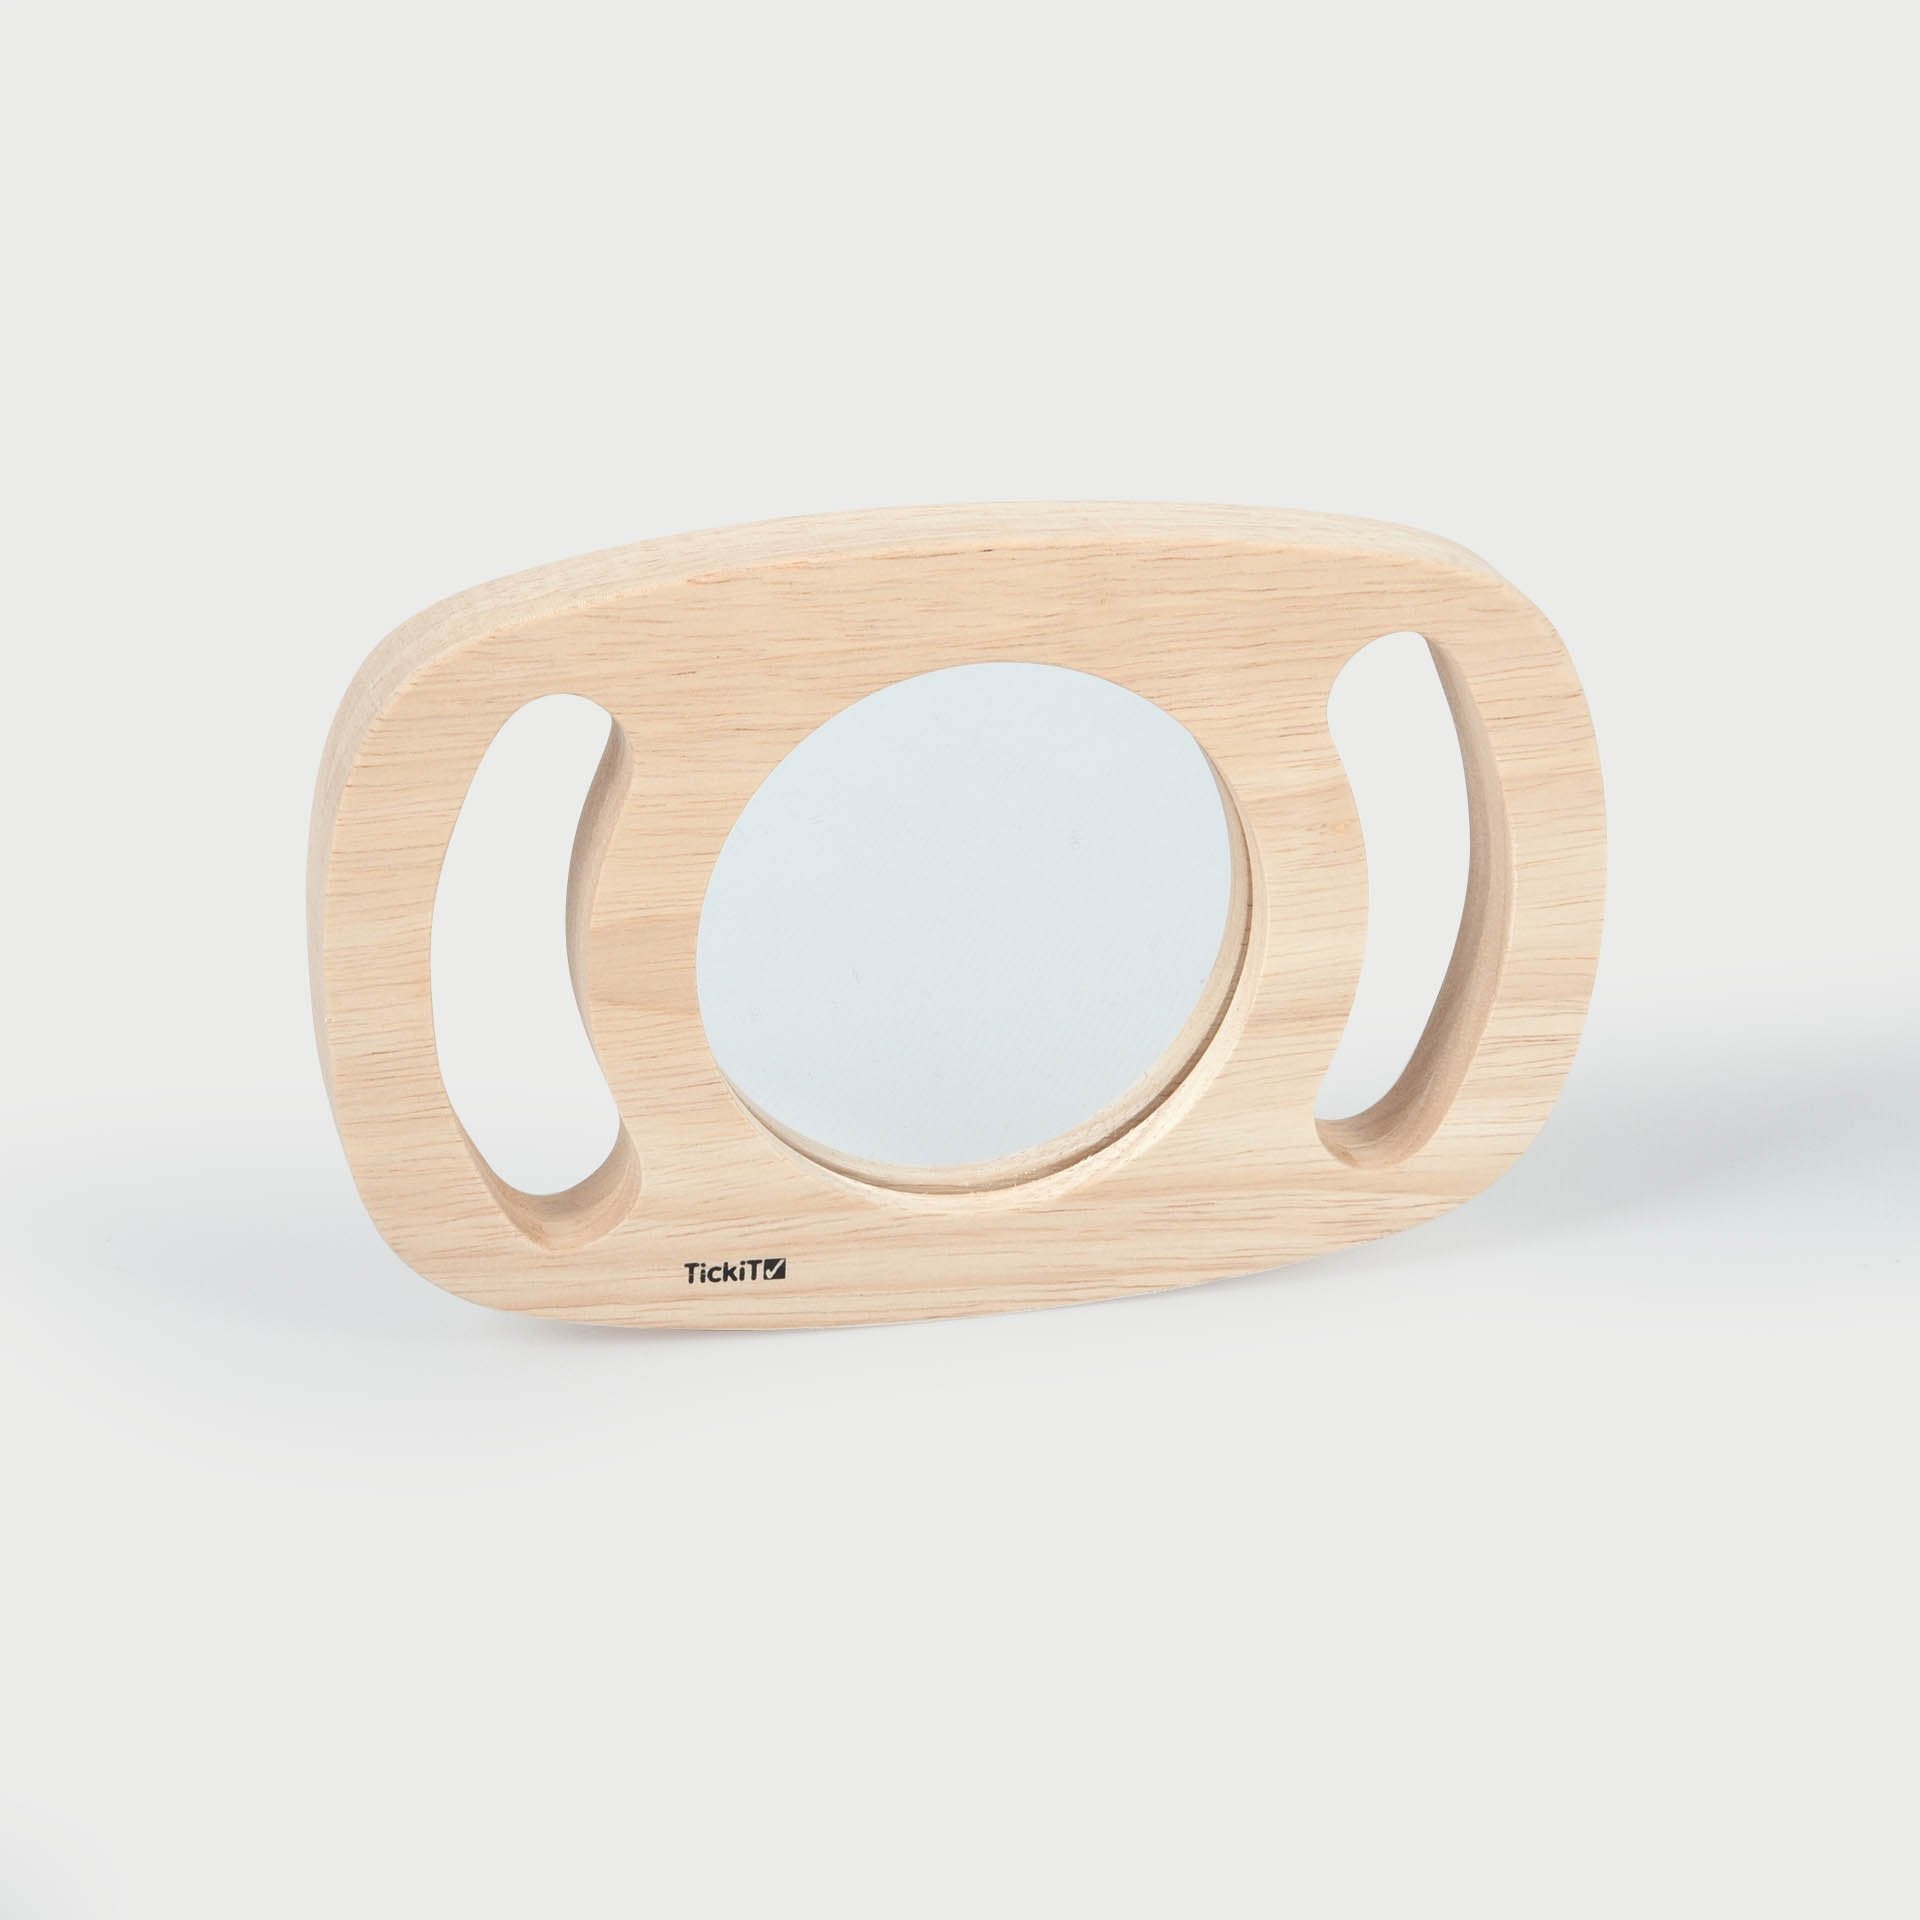 Easy Hold Plane Mirror, Introducing the TickiT Easy Hold Plane Mirror – Where Curiosity Meets Reflection! Our TickiT Easy Hold Plane Mirror is a remarkable tool designed to ignite curiosity and self-awareness in young learners. This innovative Easy Hold Plane Mirror boasts several features that make it an exceptional addition to early childhood education: Easy-to-Hold Design: Crafted with a solid rubberwood frame and handles, this mirror is perfectly sized for small hands to grasp securely. The ergonomic de